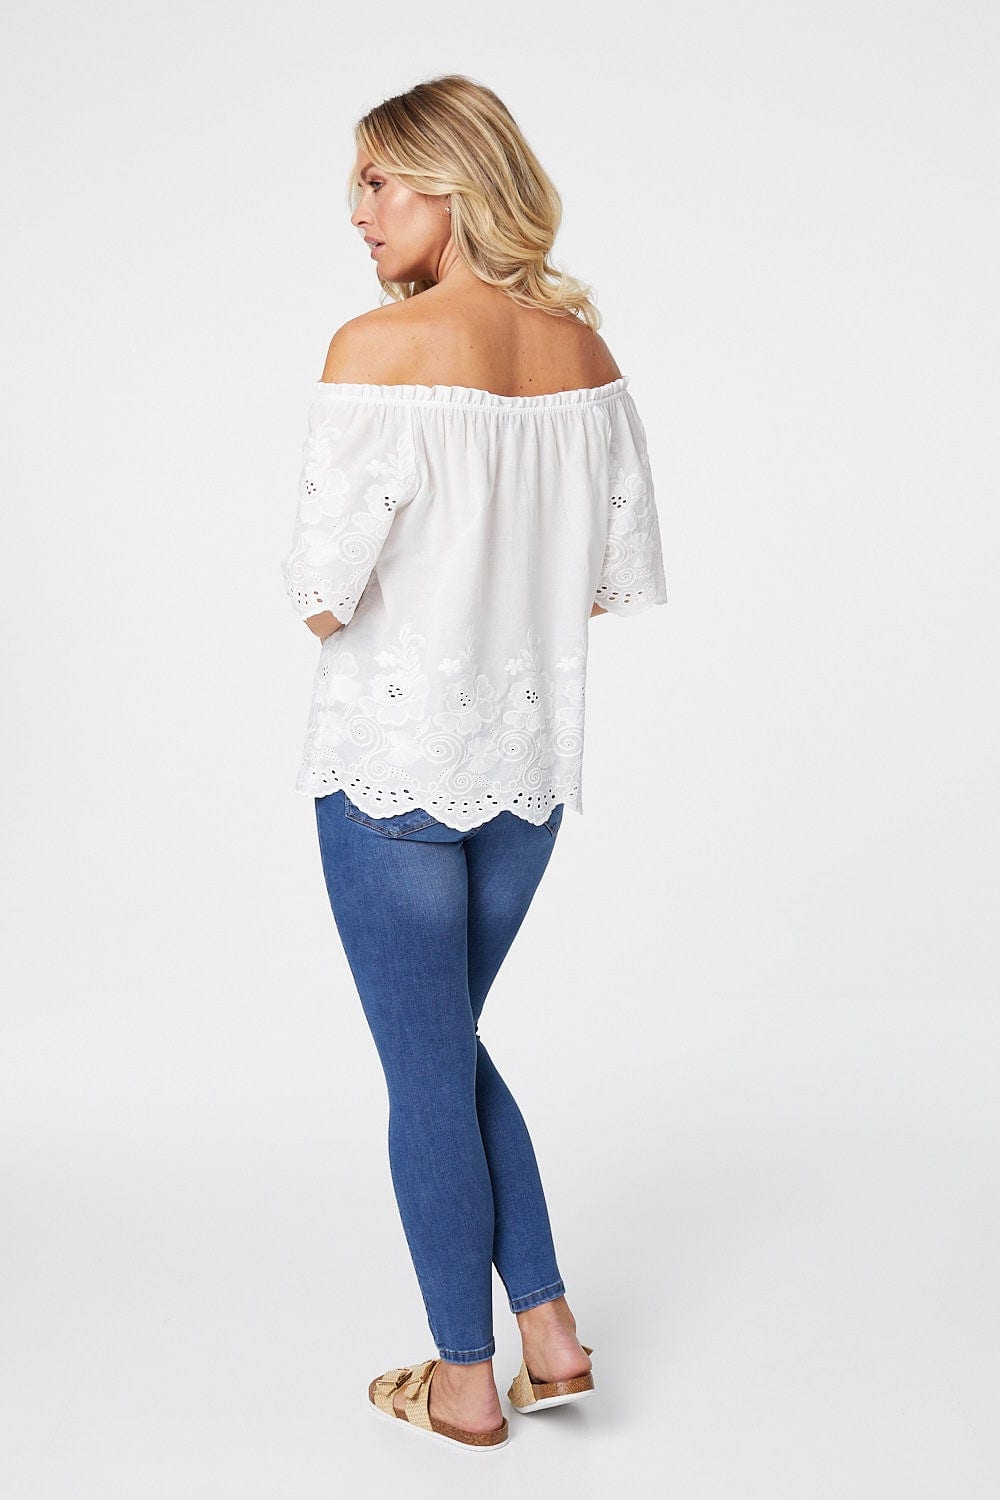 Broderie Anglaise Blouse | Izabel London